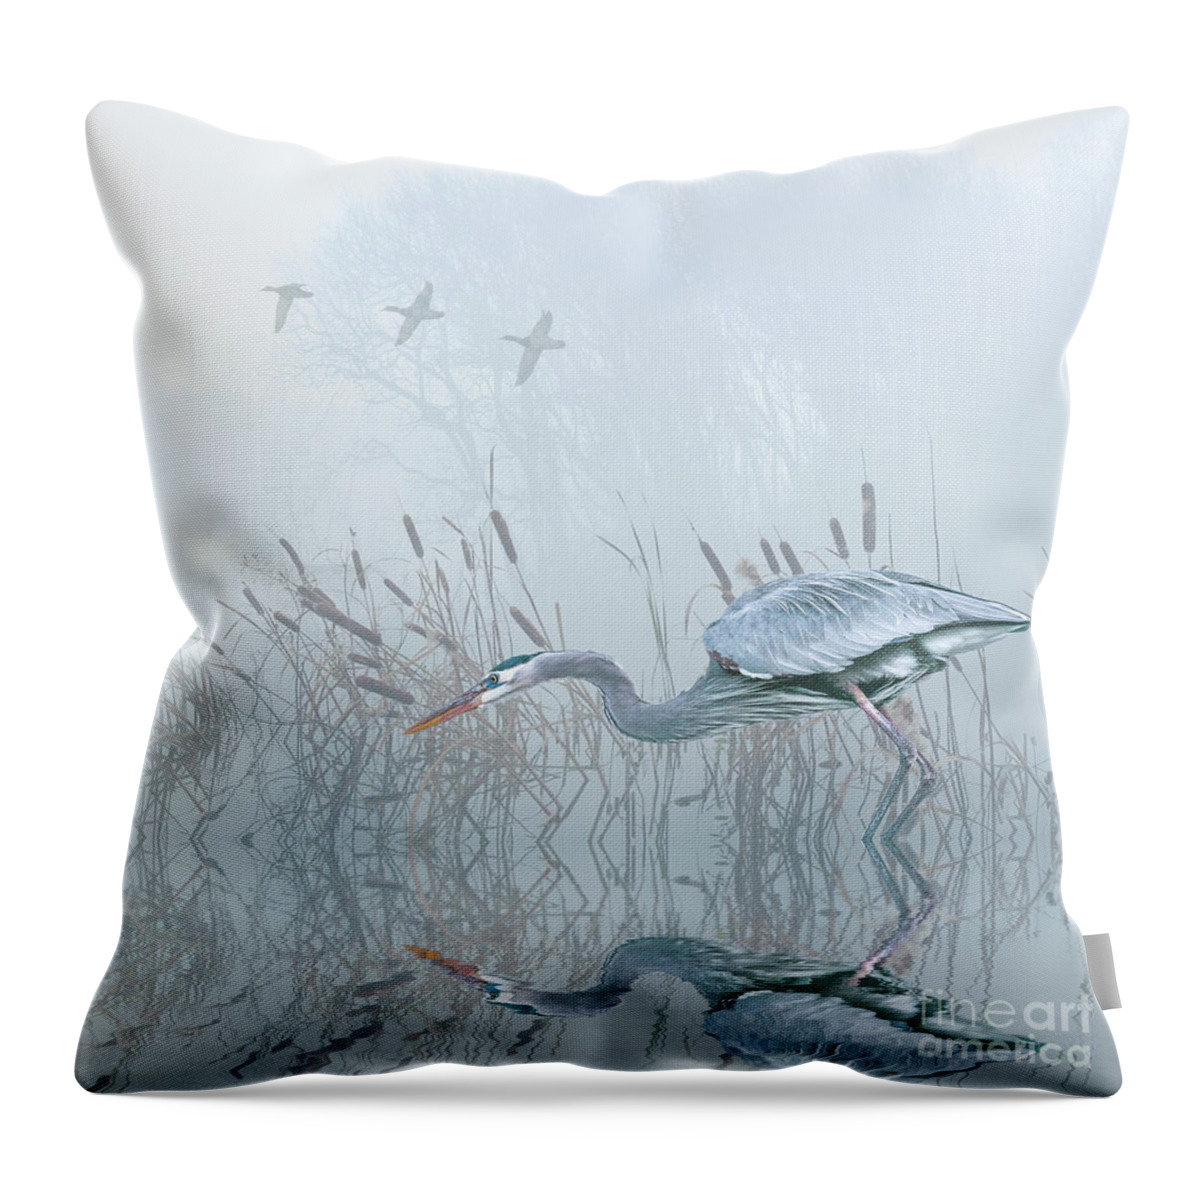 Grey Heron Throw Pillow featuring the digital art Looking for an early catch by Brian Tarr